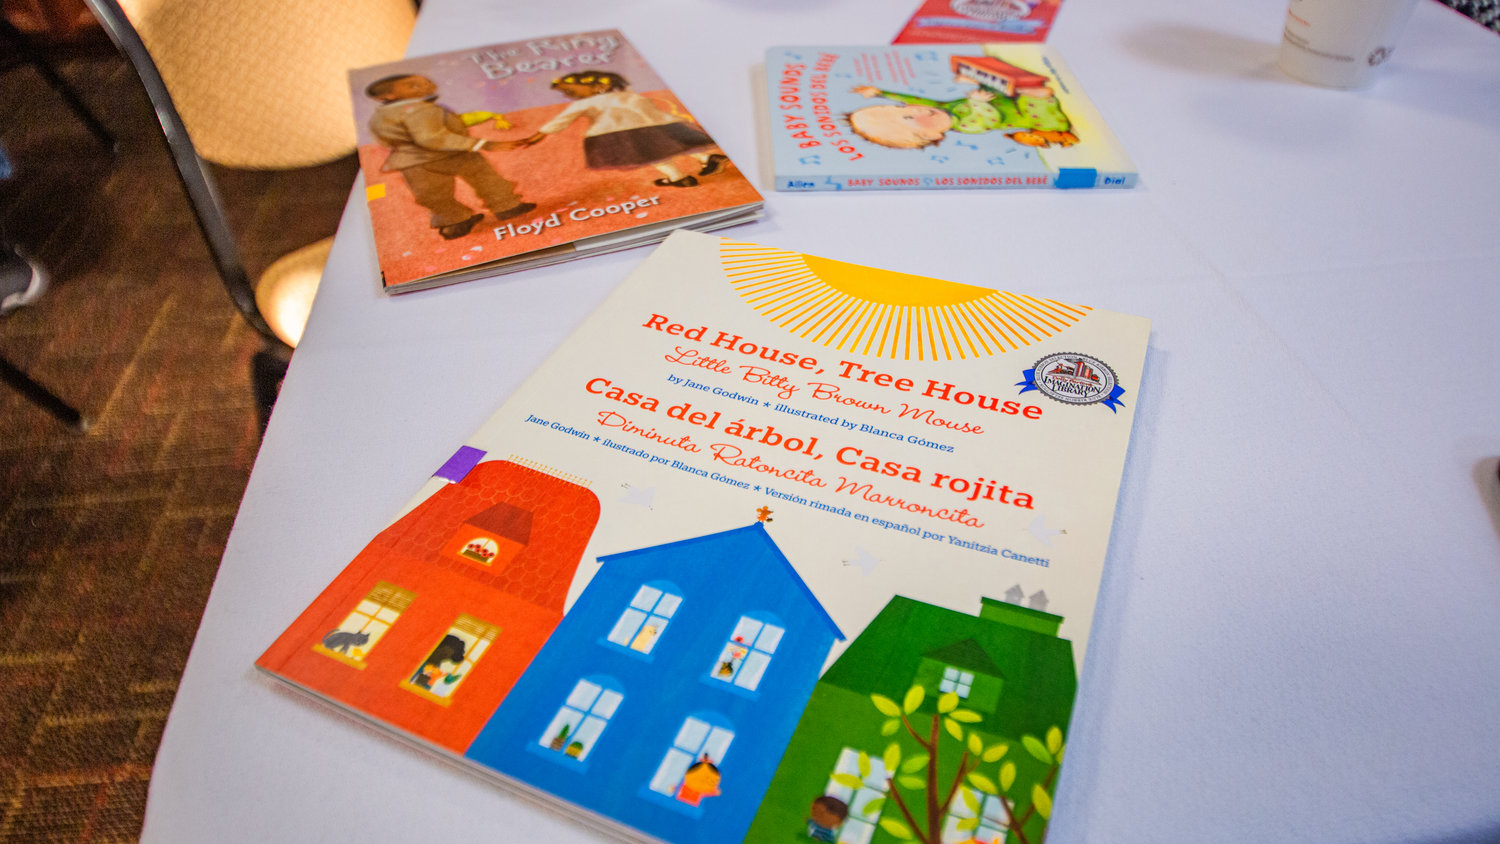 Bilingual and English children’s books that are part of the Dolly Parton Imagination Library Program sit on tables in the Holiday Inn during a Friday morning meeting of the Twin Cities Rotary.